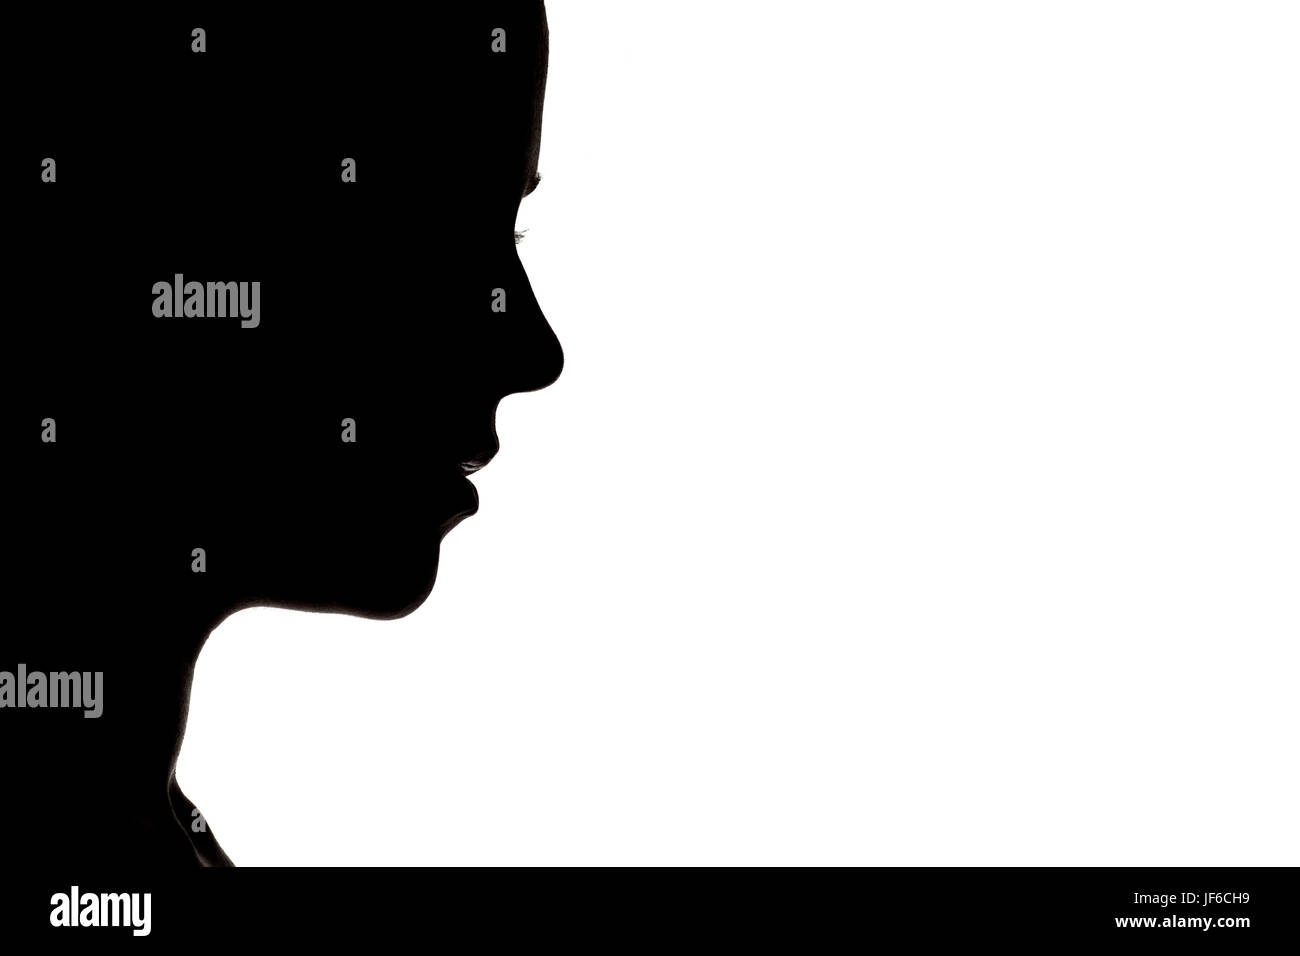 Profile Silhouette of a Woman on White Background Stock Photo